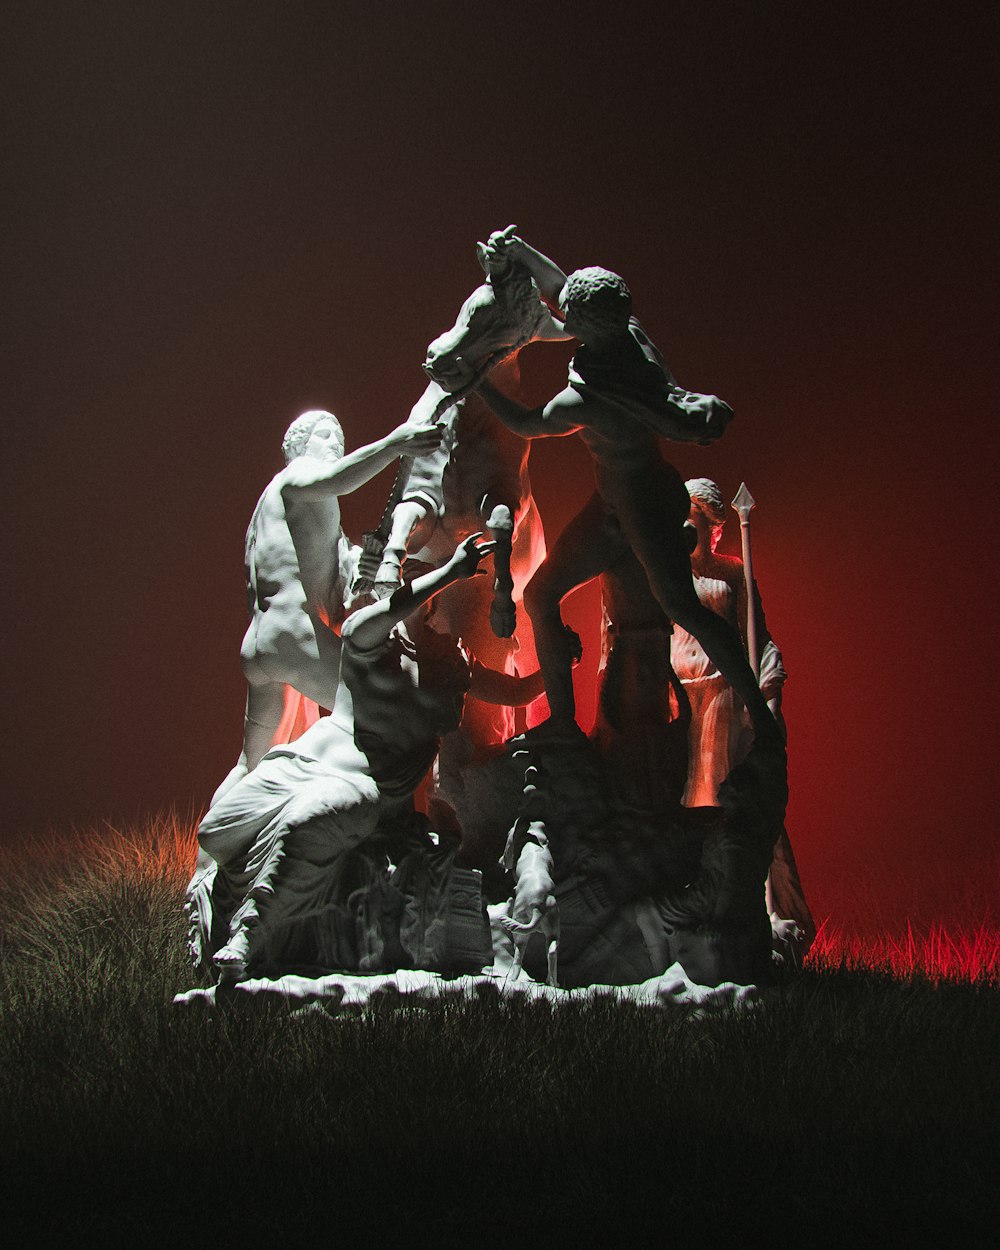 a sculpture of a man and a woman fighting over a fire hydrant